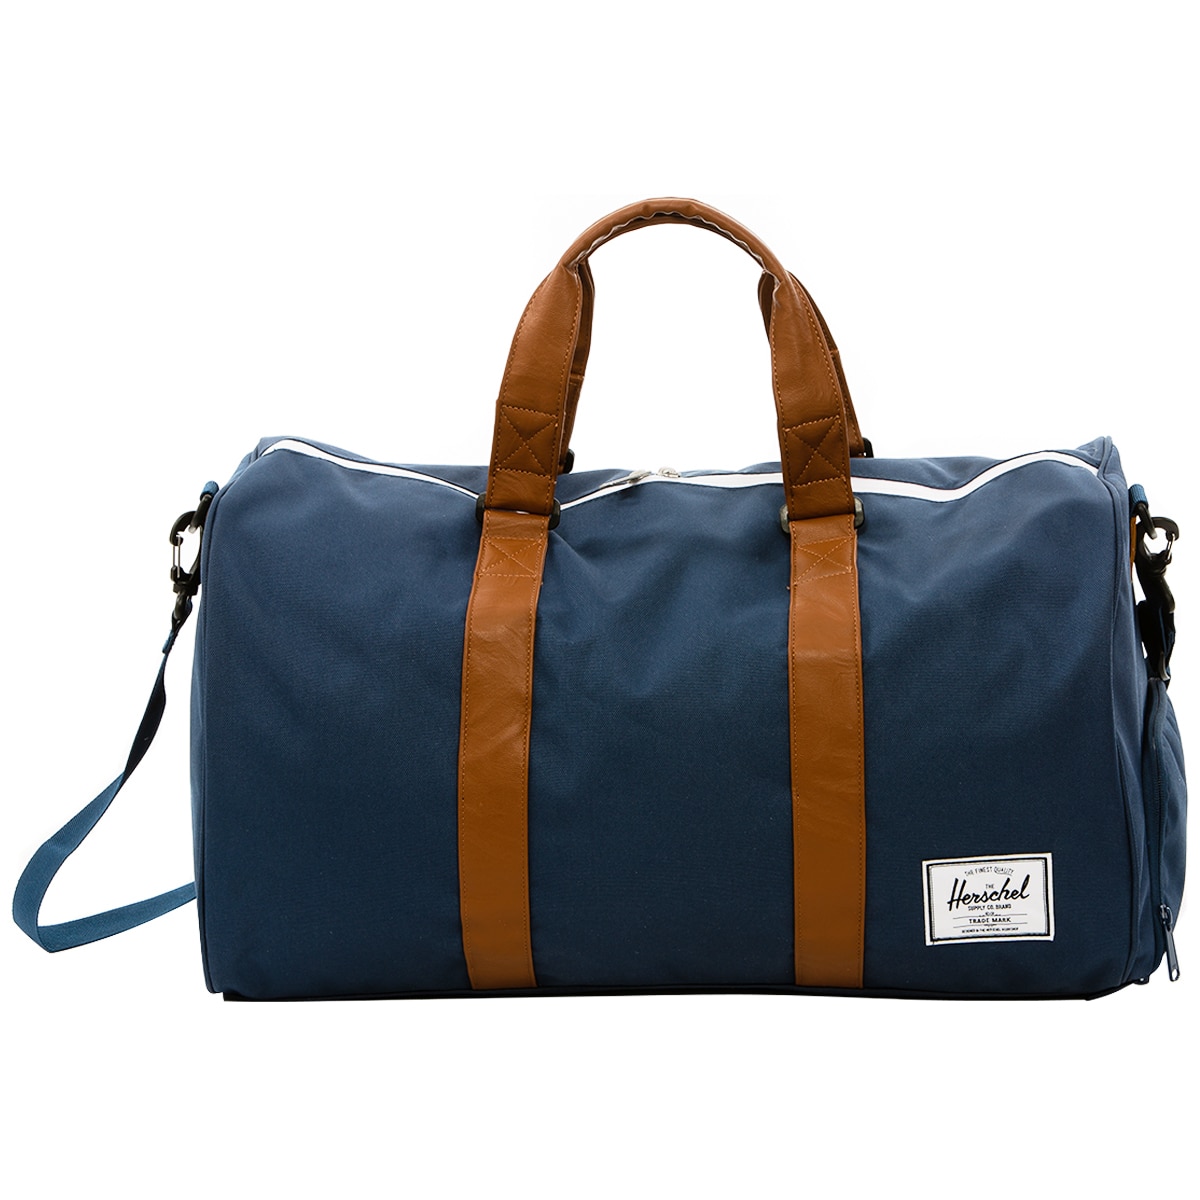 duffel carry on luggage